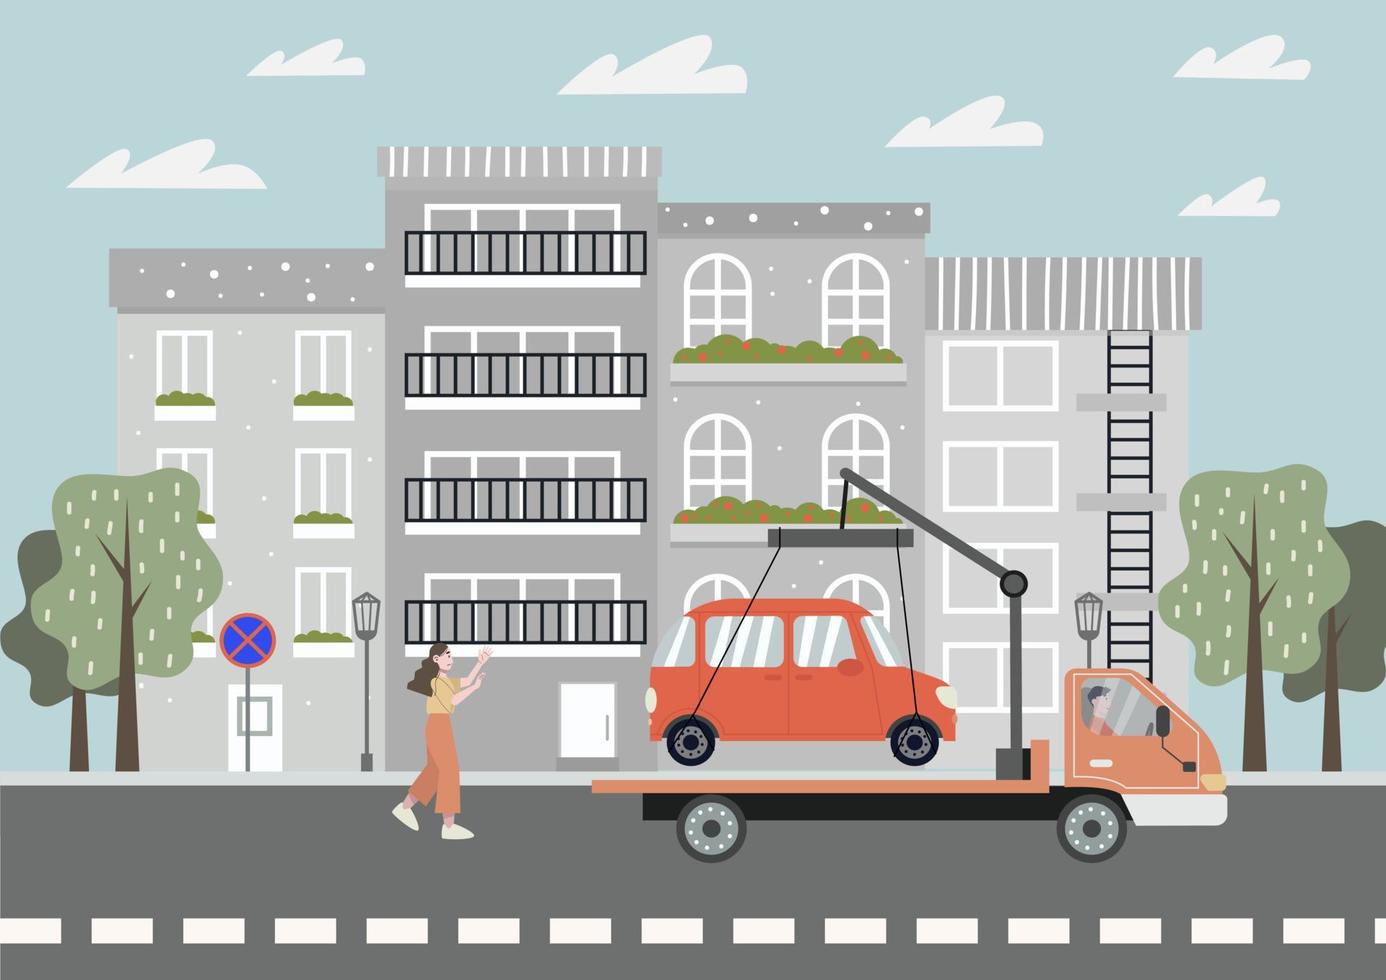 Tow truck takes away a car. Woman running the car. Parking is prohibited. City background. Flat vector illustration.